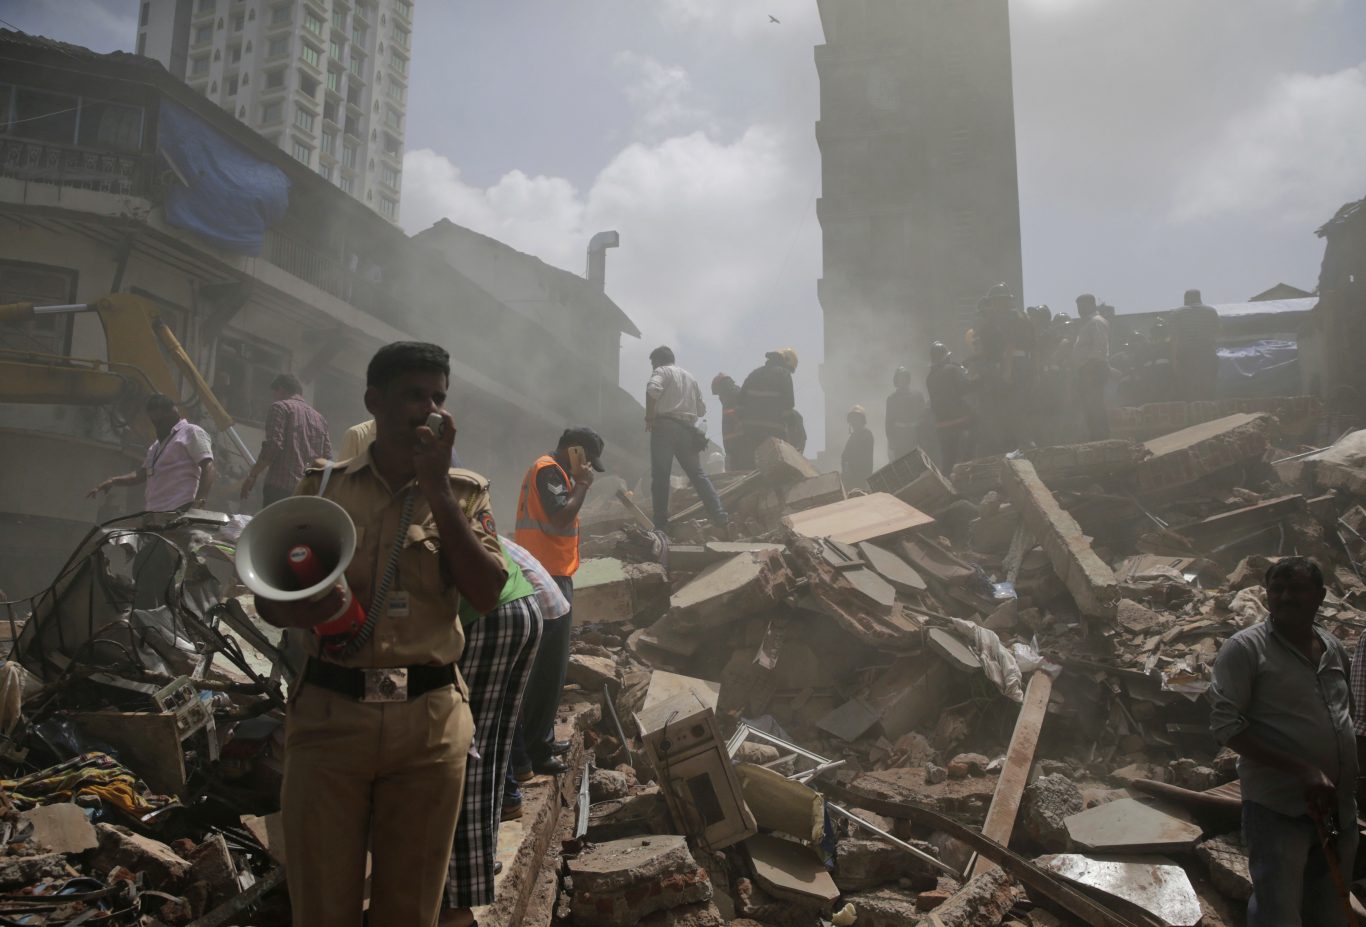 A policeman makes an announcement on a loudspeaker at the site of building collapse in Mumbai (Rafiq Maqbool/AP)